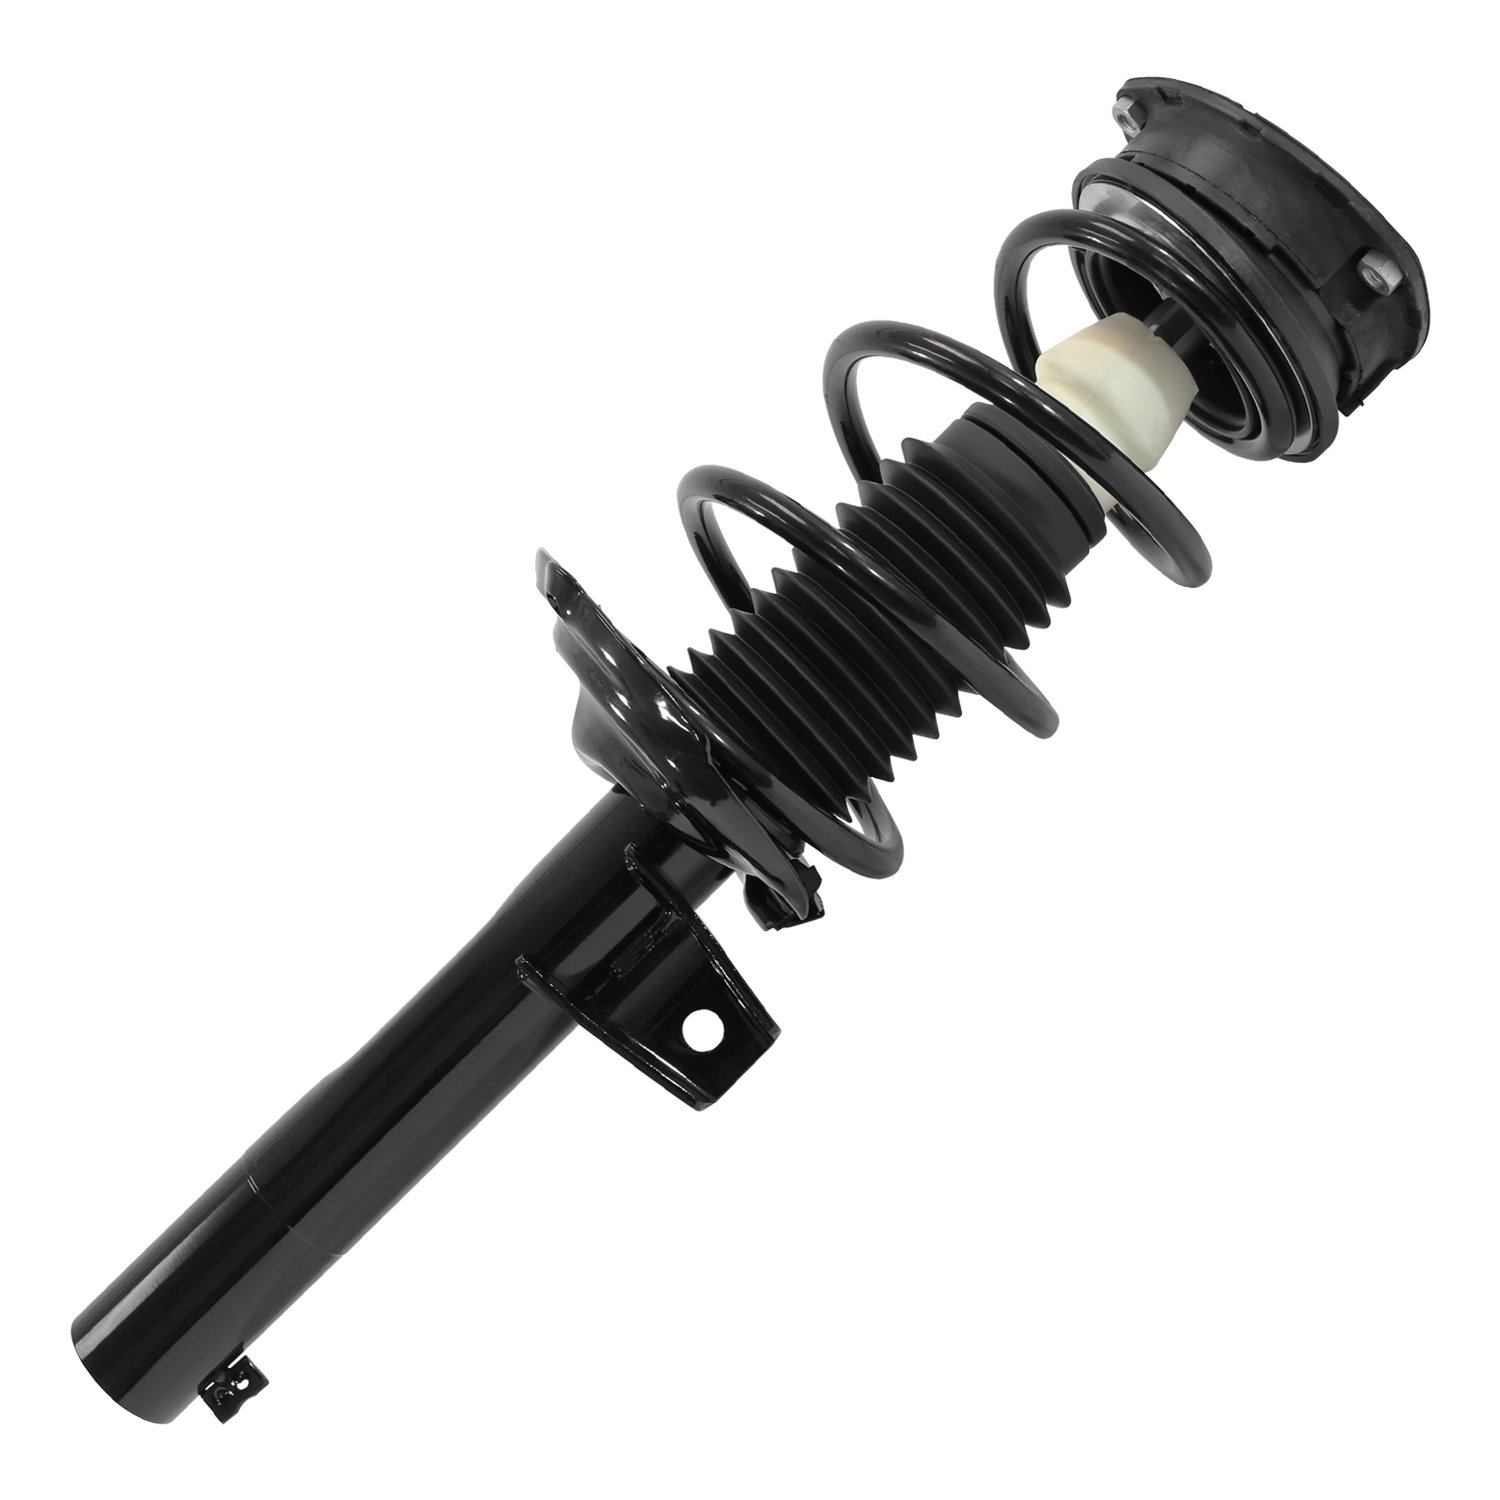 13290 Front Suspension Strut & Coil Spring Assembly Fits Select Audi A3 Quattro, Audi A3, Volkswagen Golf